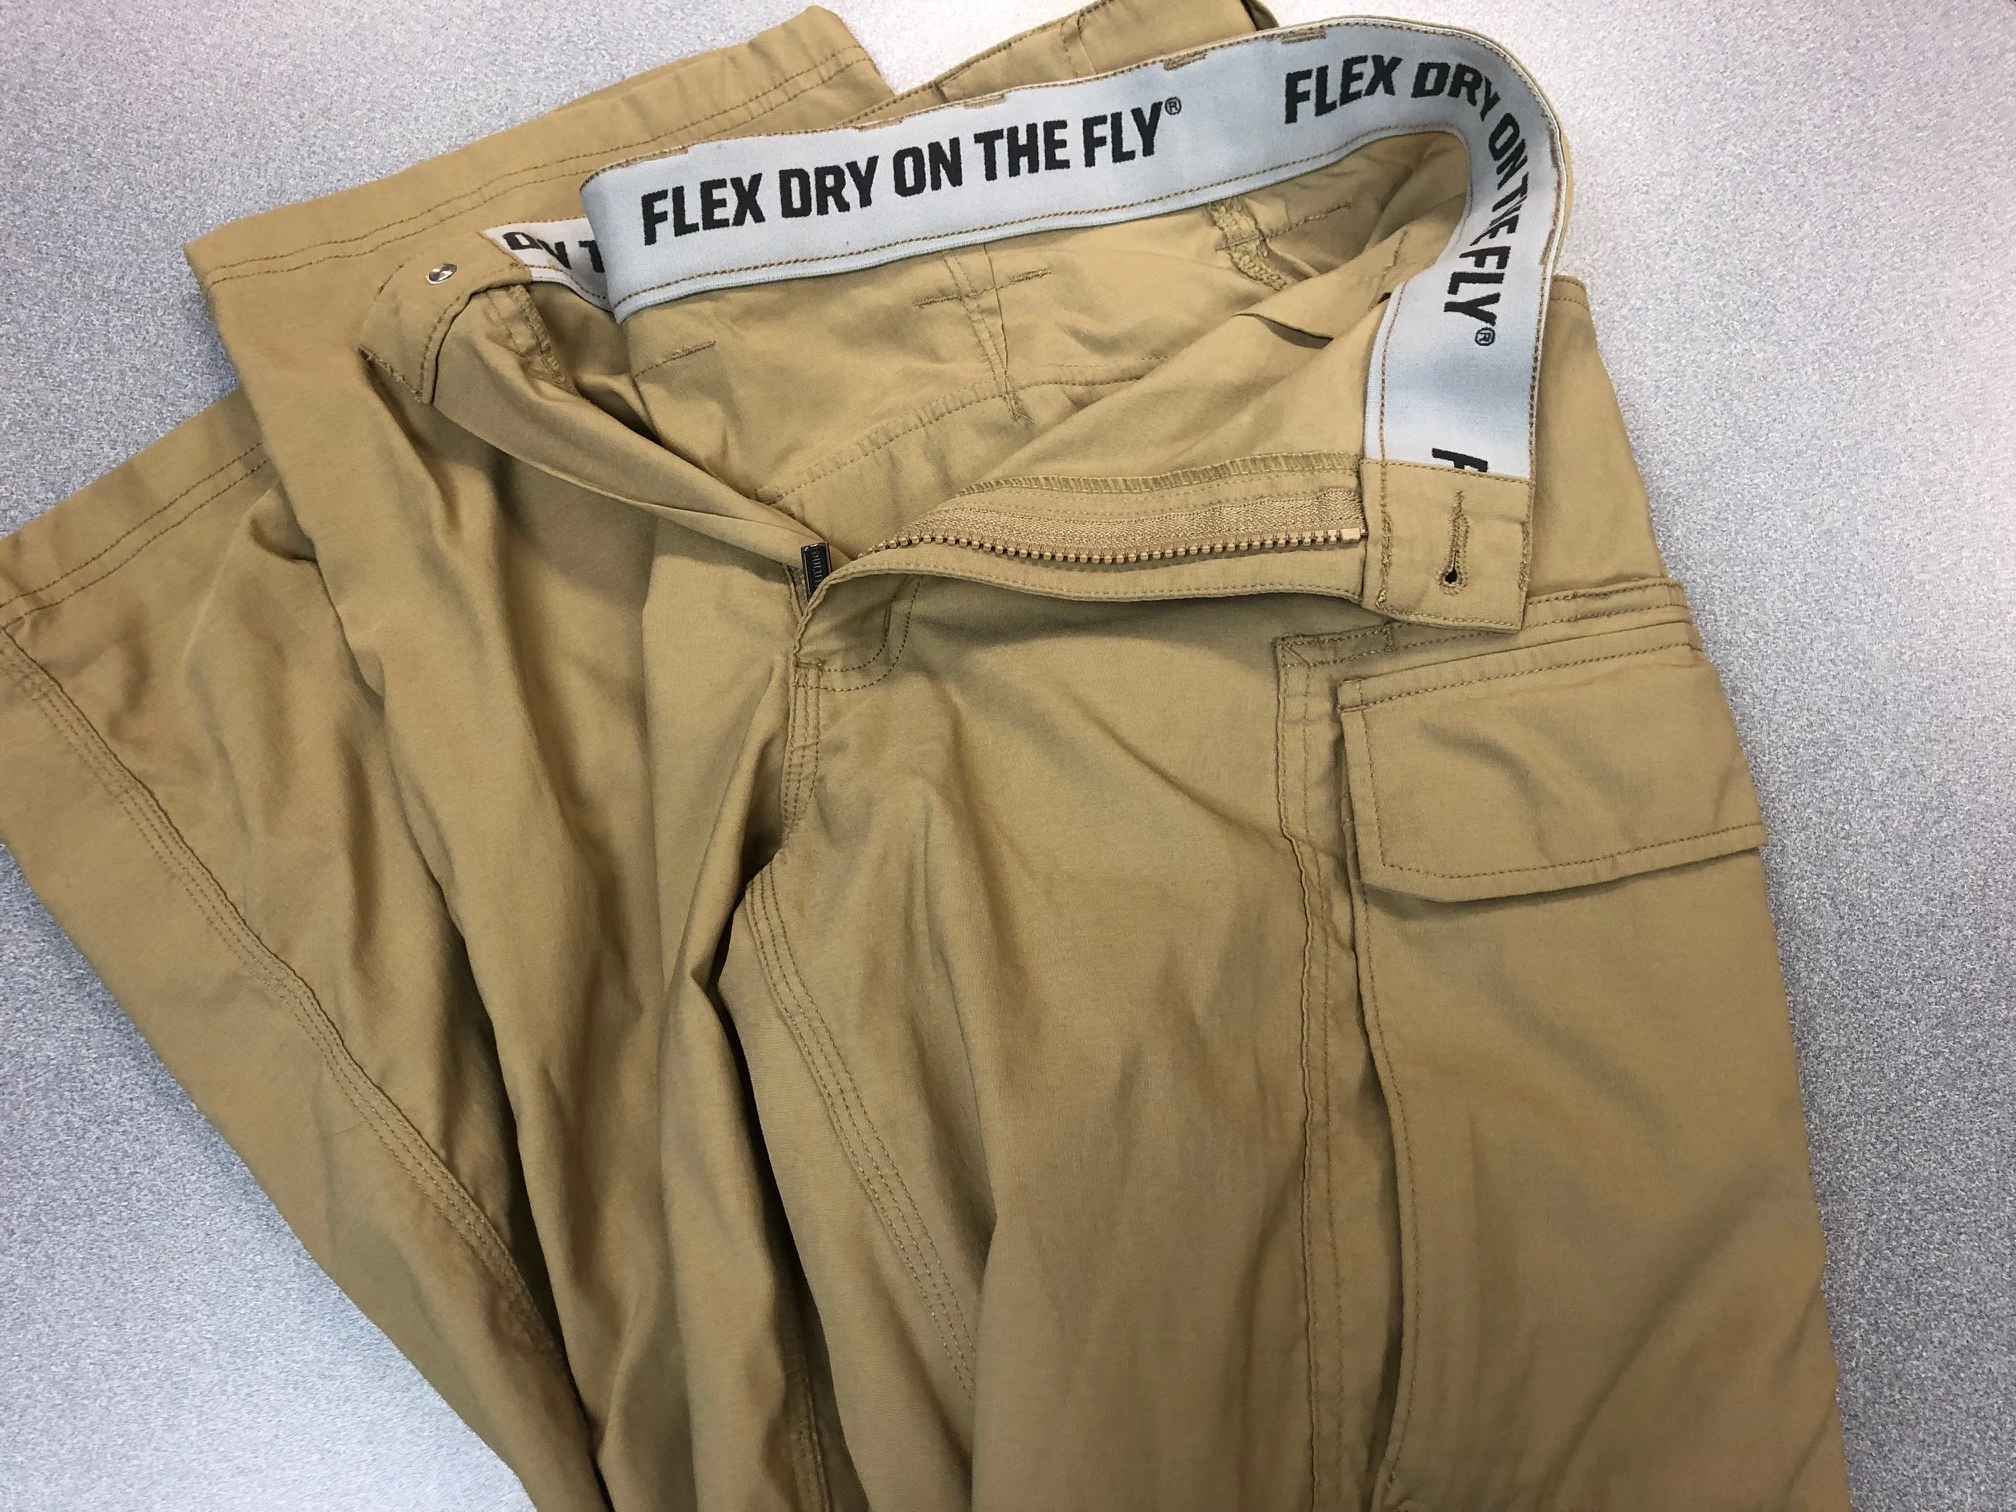 Duluth Trading Company Dry On The Fly Pants - Colorado Mountain Mom